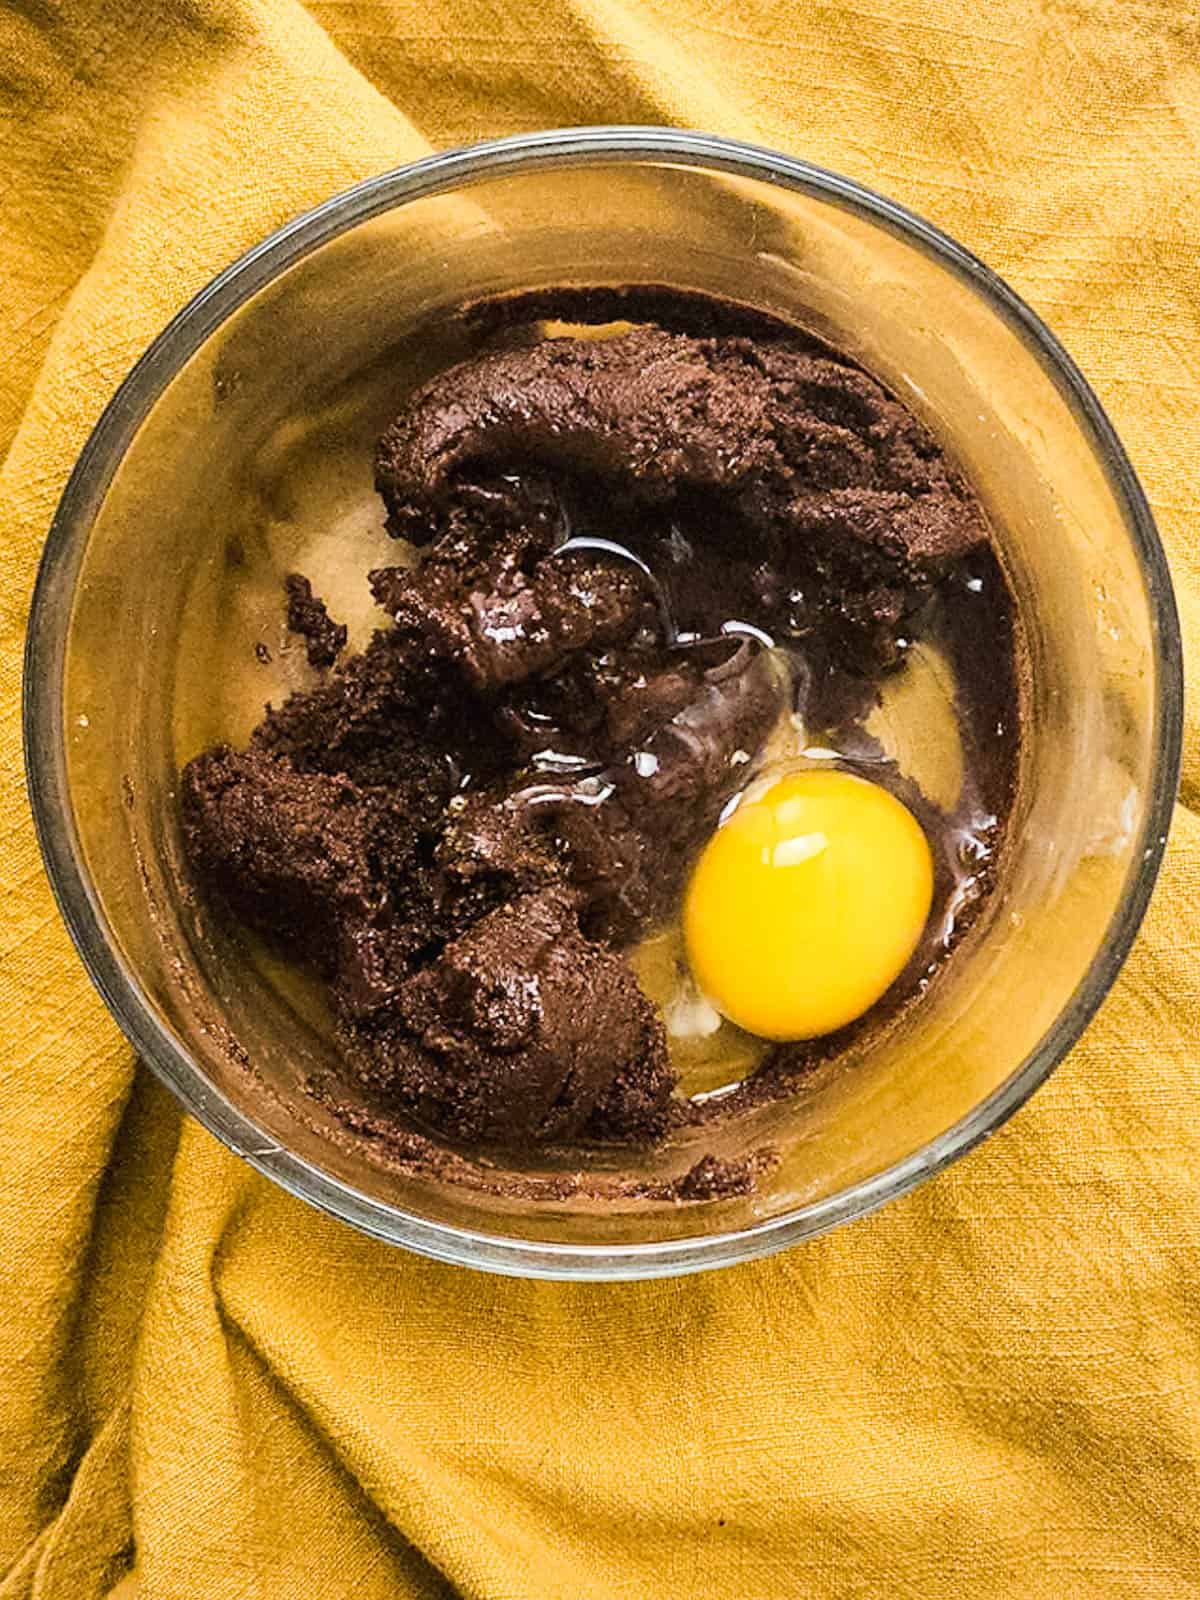 A cookie batter in a glass bowl with a raw egg.